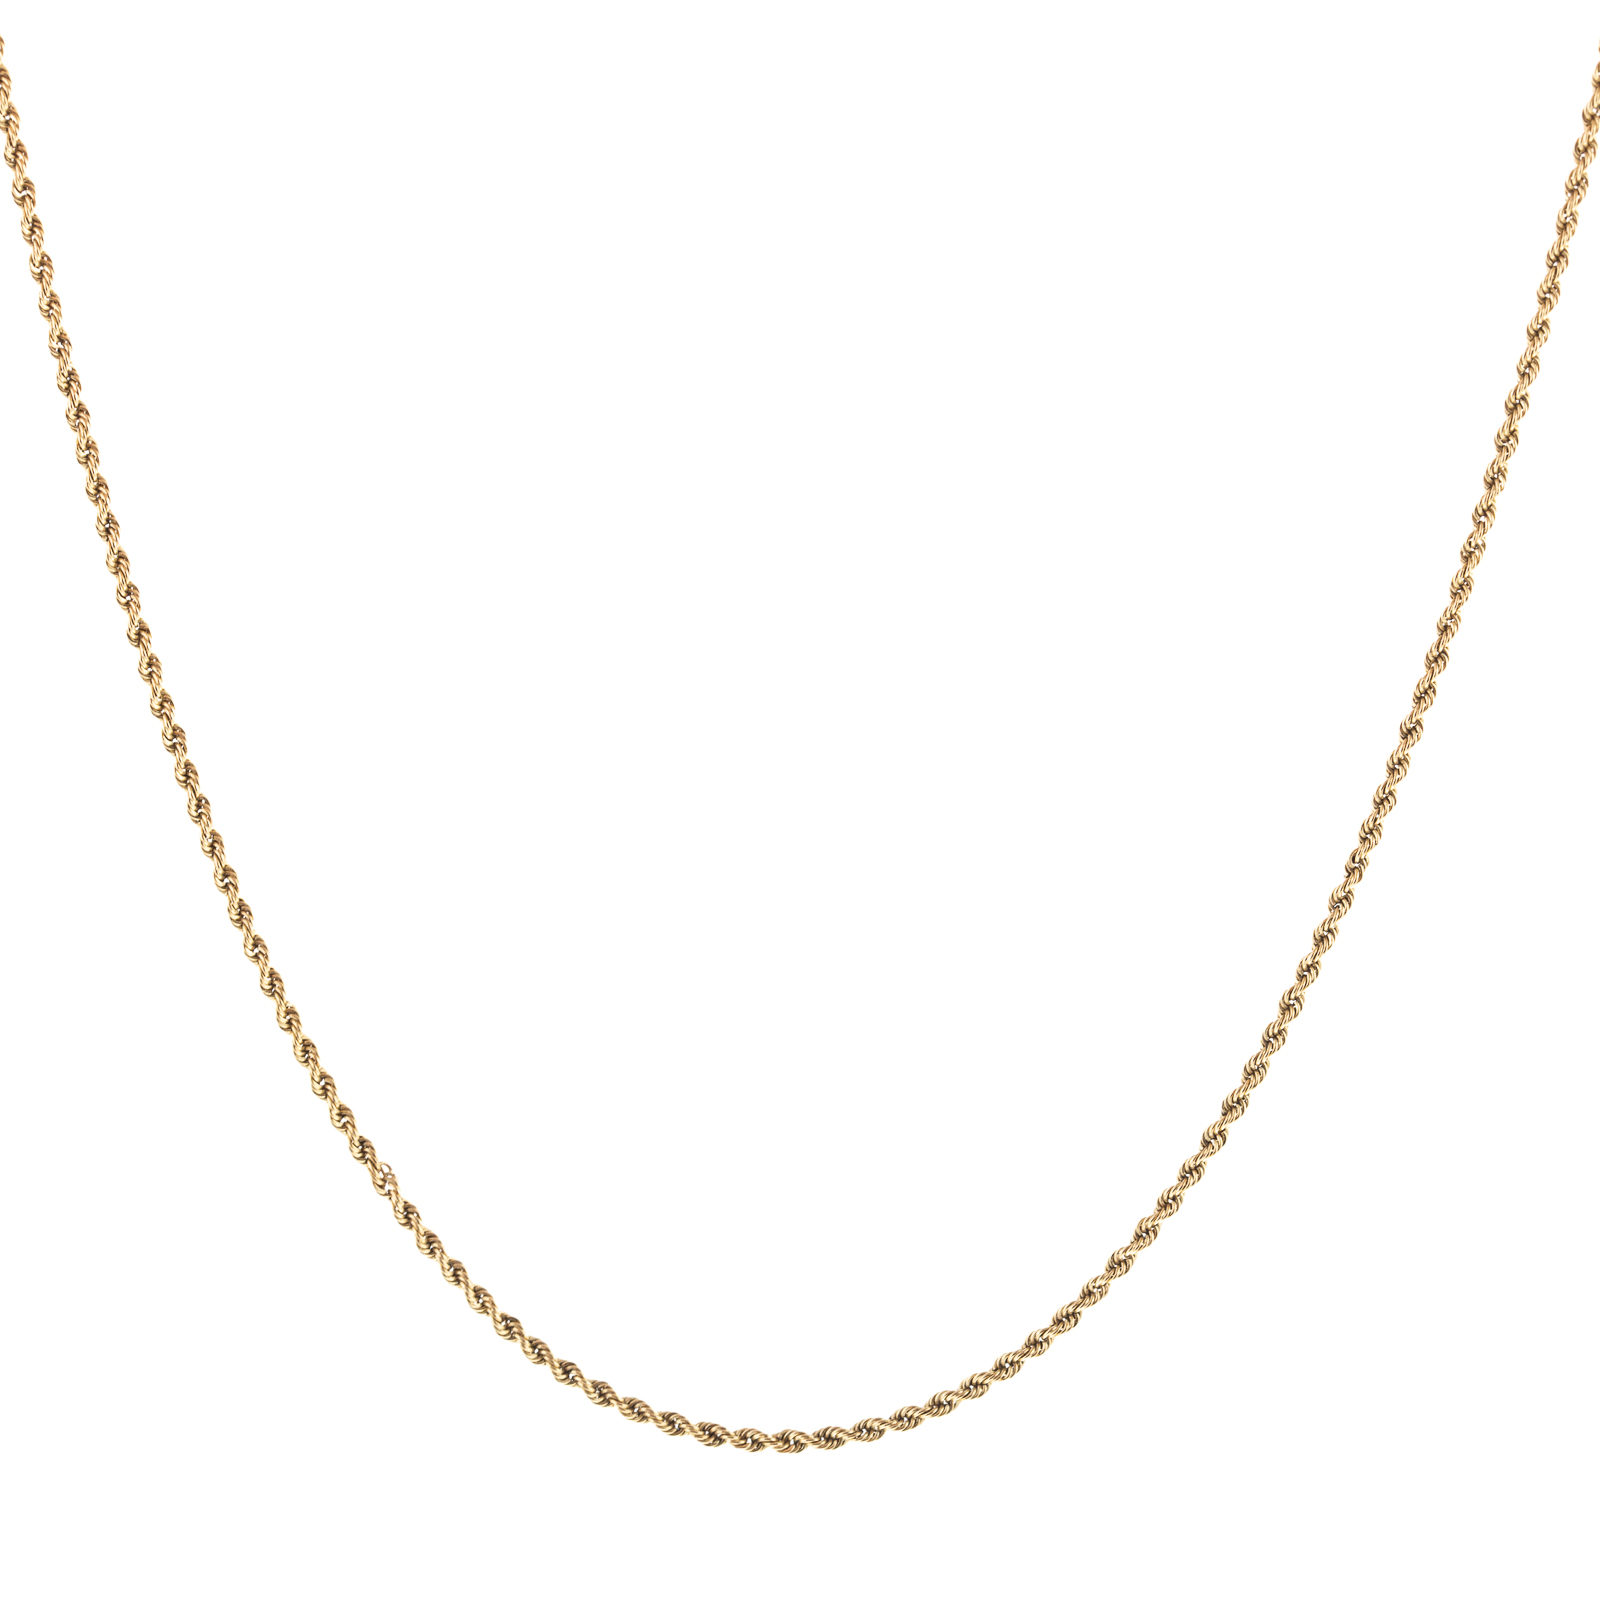 A LONG TWISTED ROPE CHAIN NECKLACE